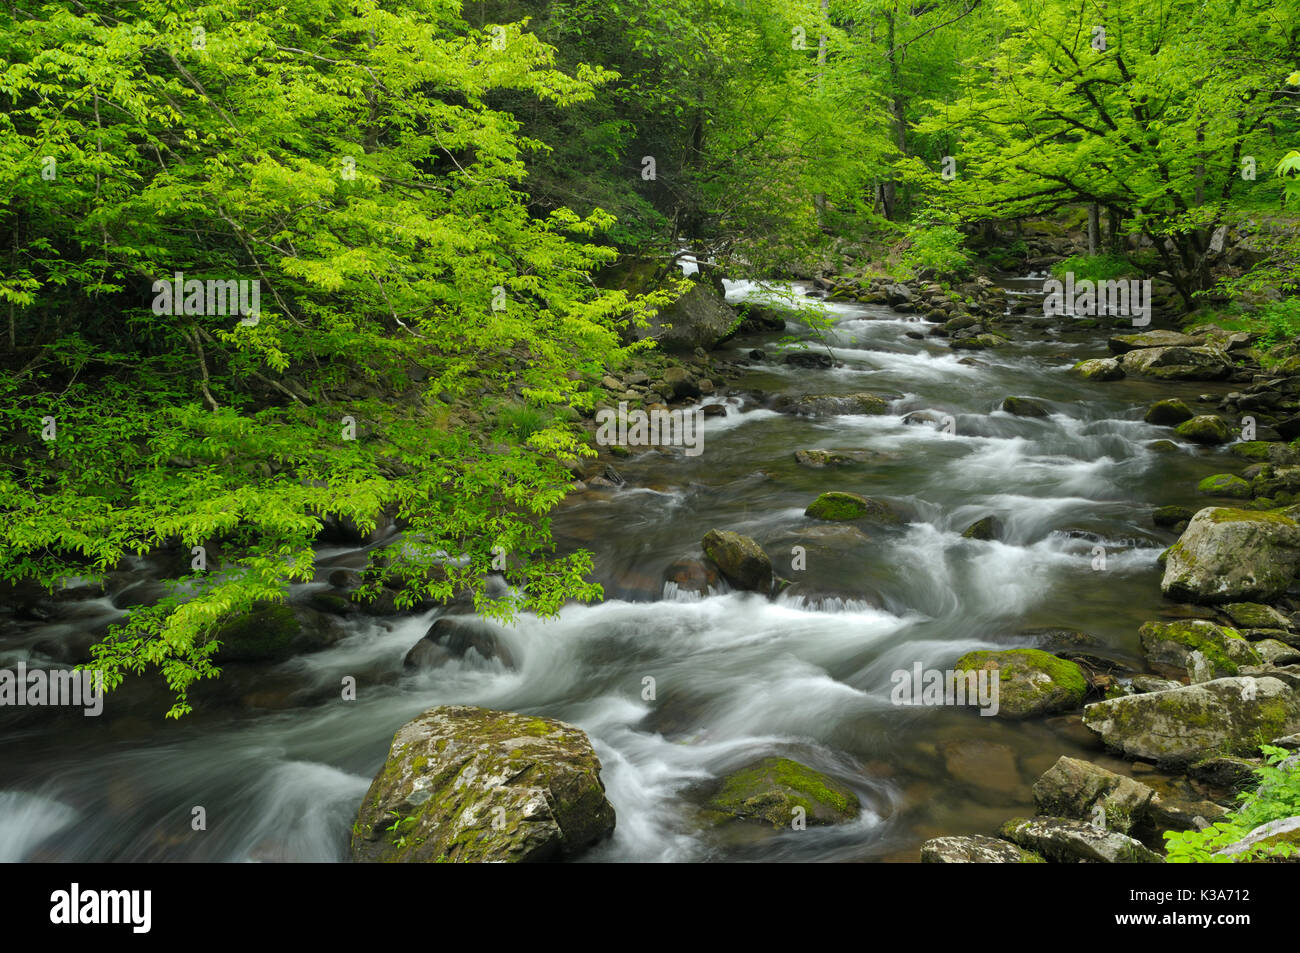 Cascades in the middle prong of the Little Pigeon River in Tremont of Great Smoky Mountains National Park, Tennessee, USA in mid May. Stock Photo